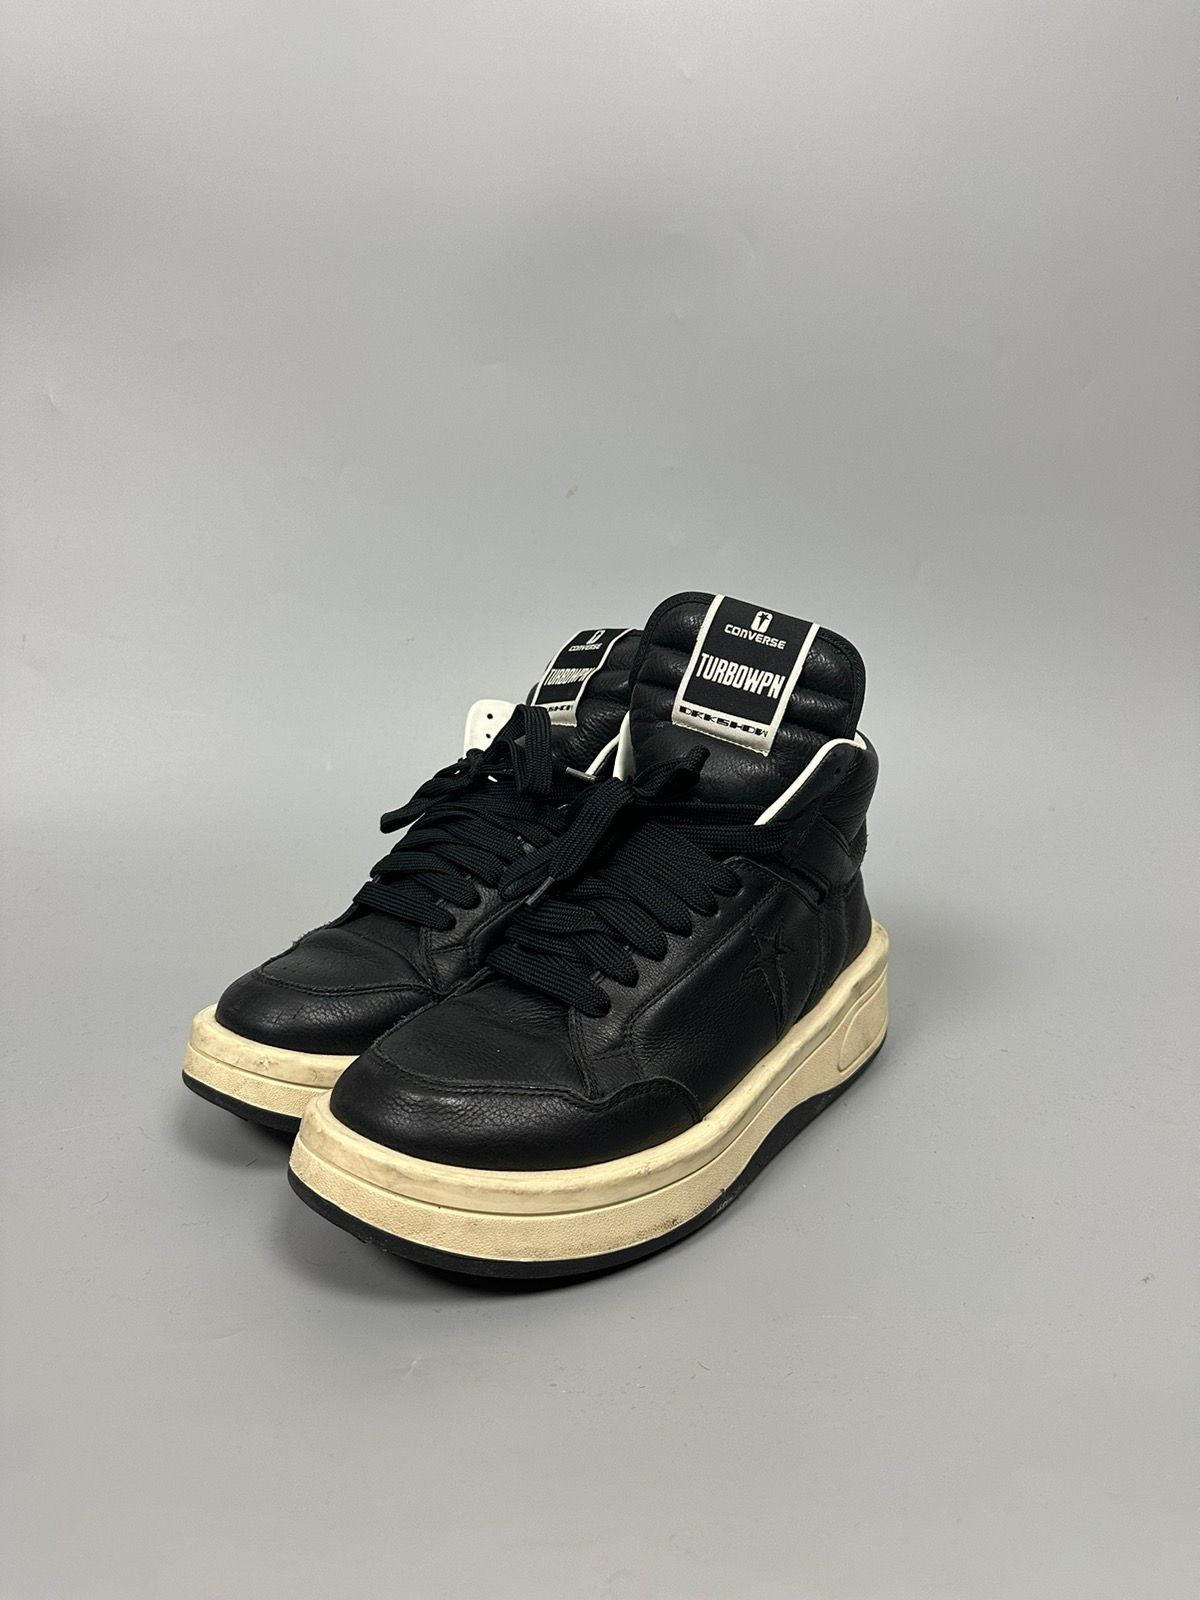 Pre-owned Converse X Rick Owens Drkshdw Converse Turbowpn Shoes In Black